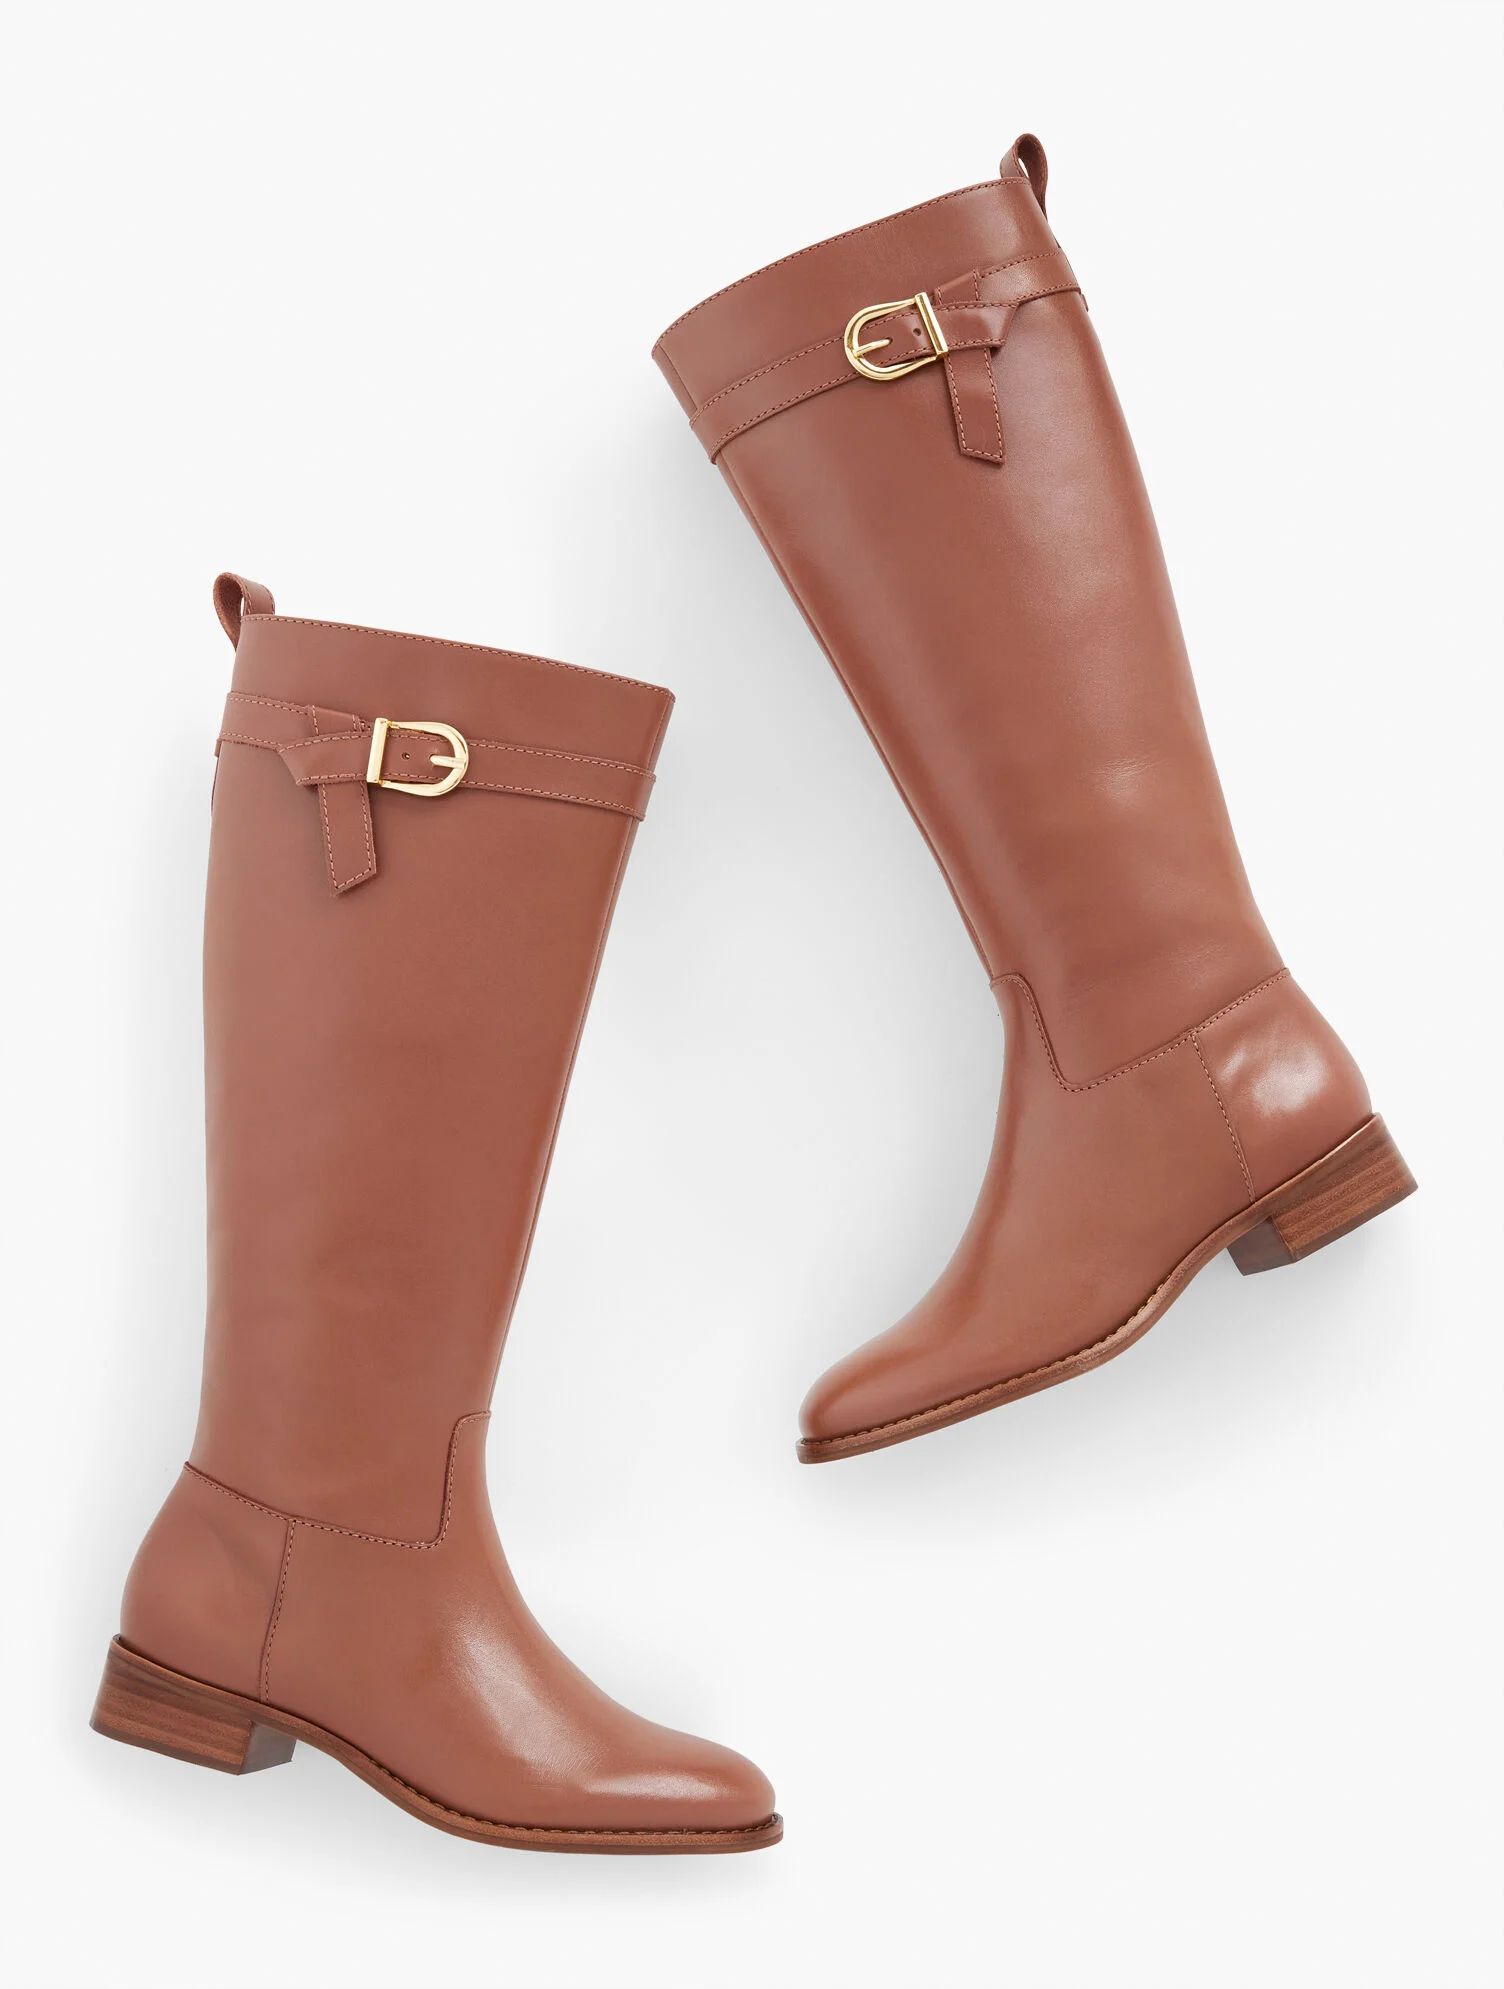 Tish Tie Leather Riding Boots | Talbots